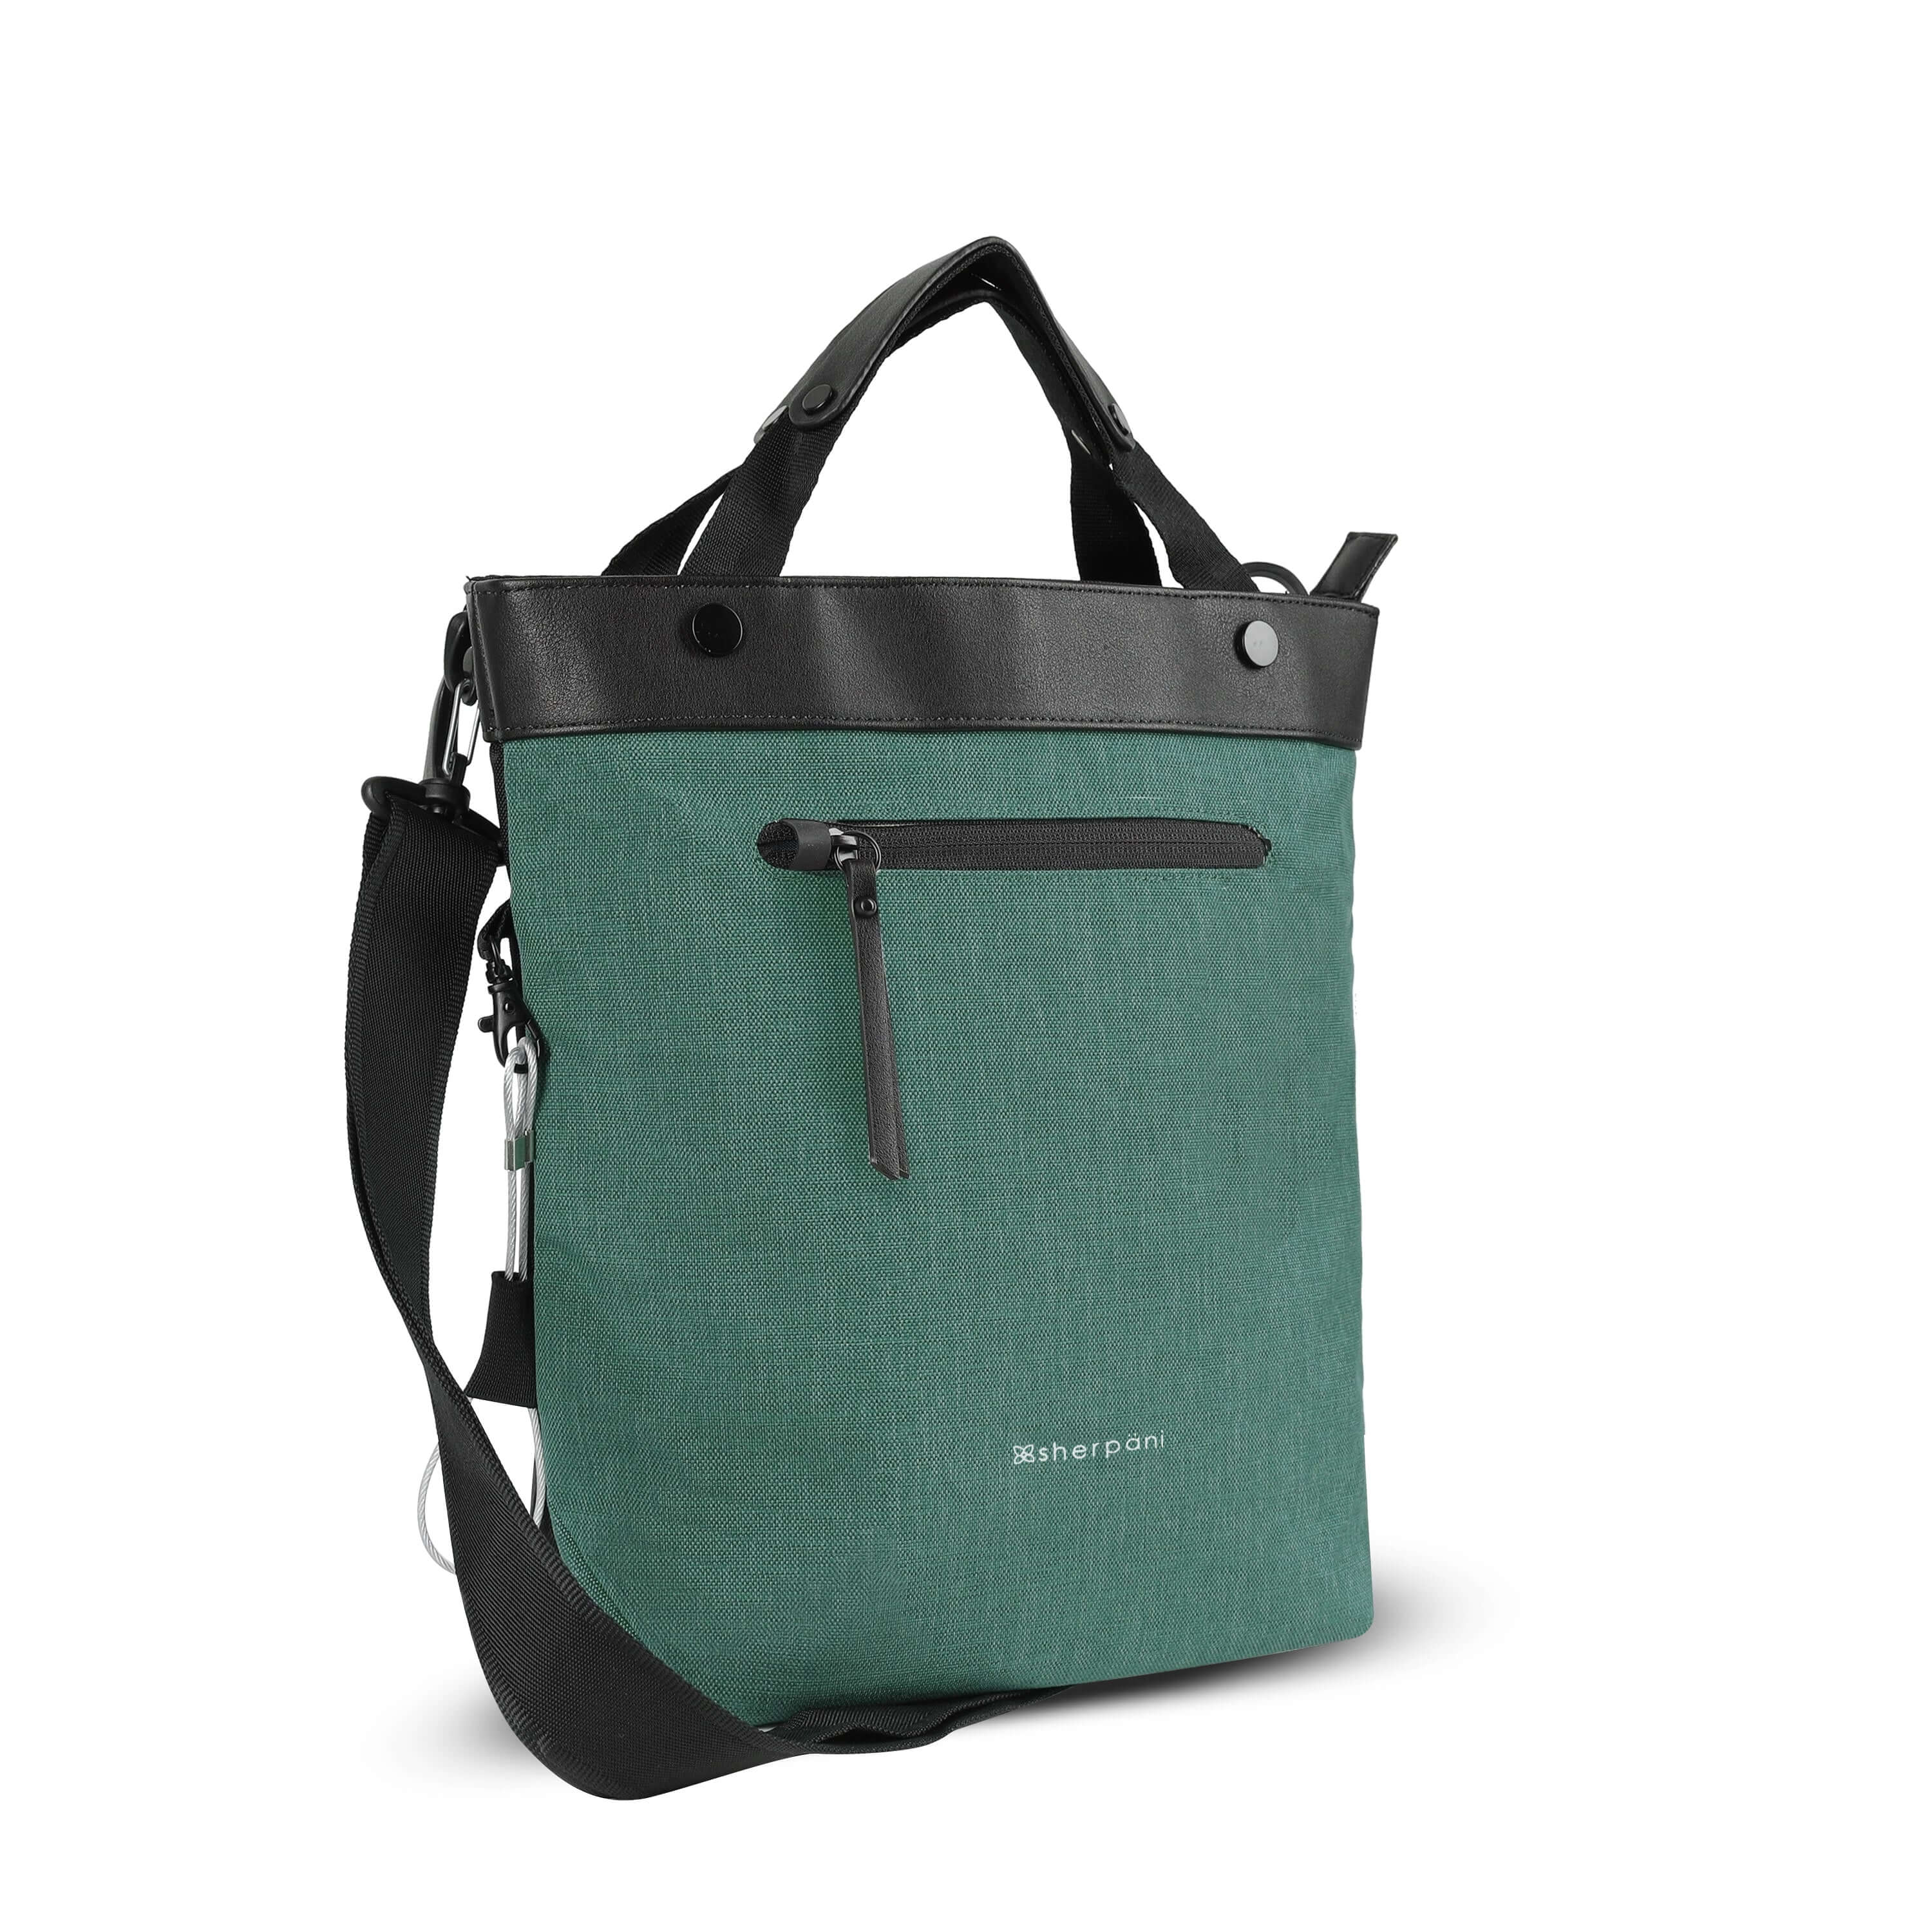 Angled front view of Sherpani's Anti-Theft bag, the Geo AT in Teal, with vegan leather accents in black. The bag features short tote handles and an adjustable/detachable crossbody strap. There is a locking zipper compartment on the front. A chair loop lock is clipped to the side and secured in place by an elastic tab. #color_teal